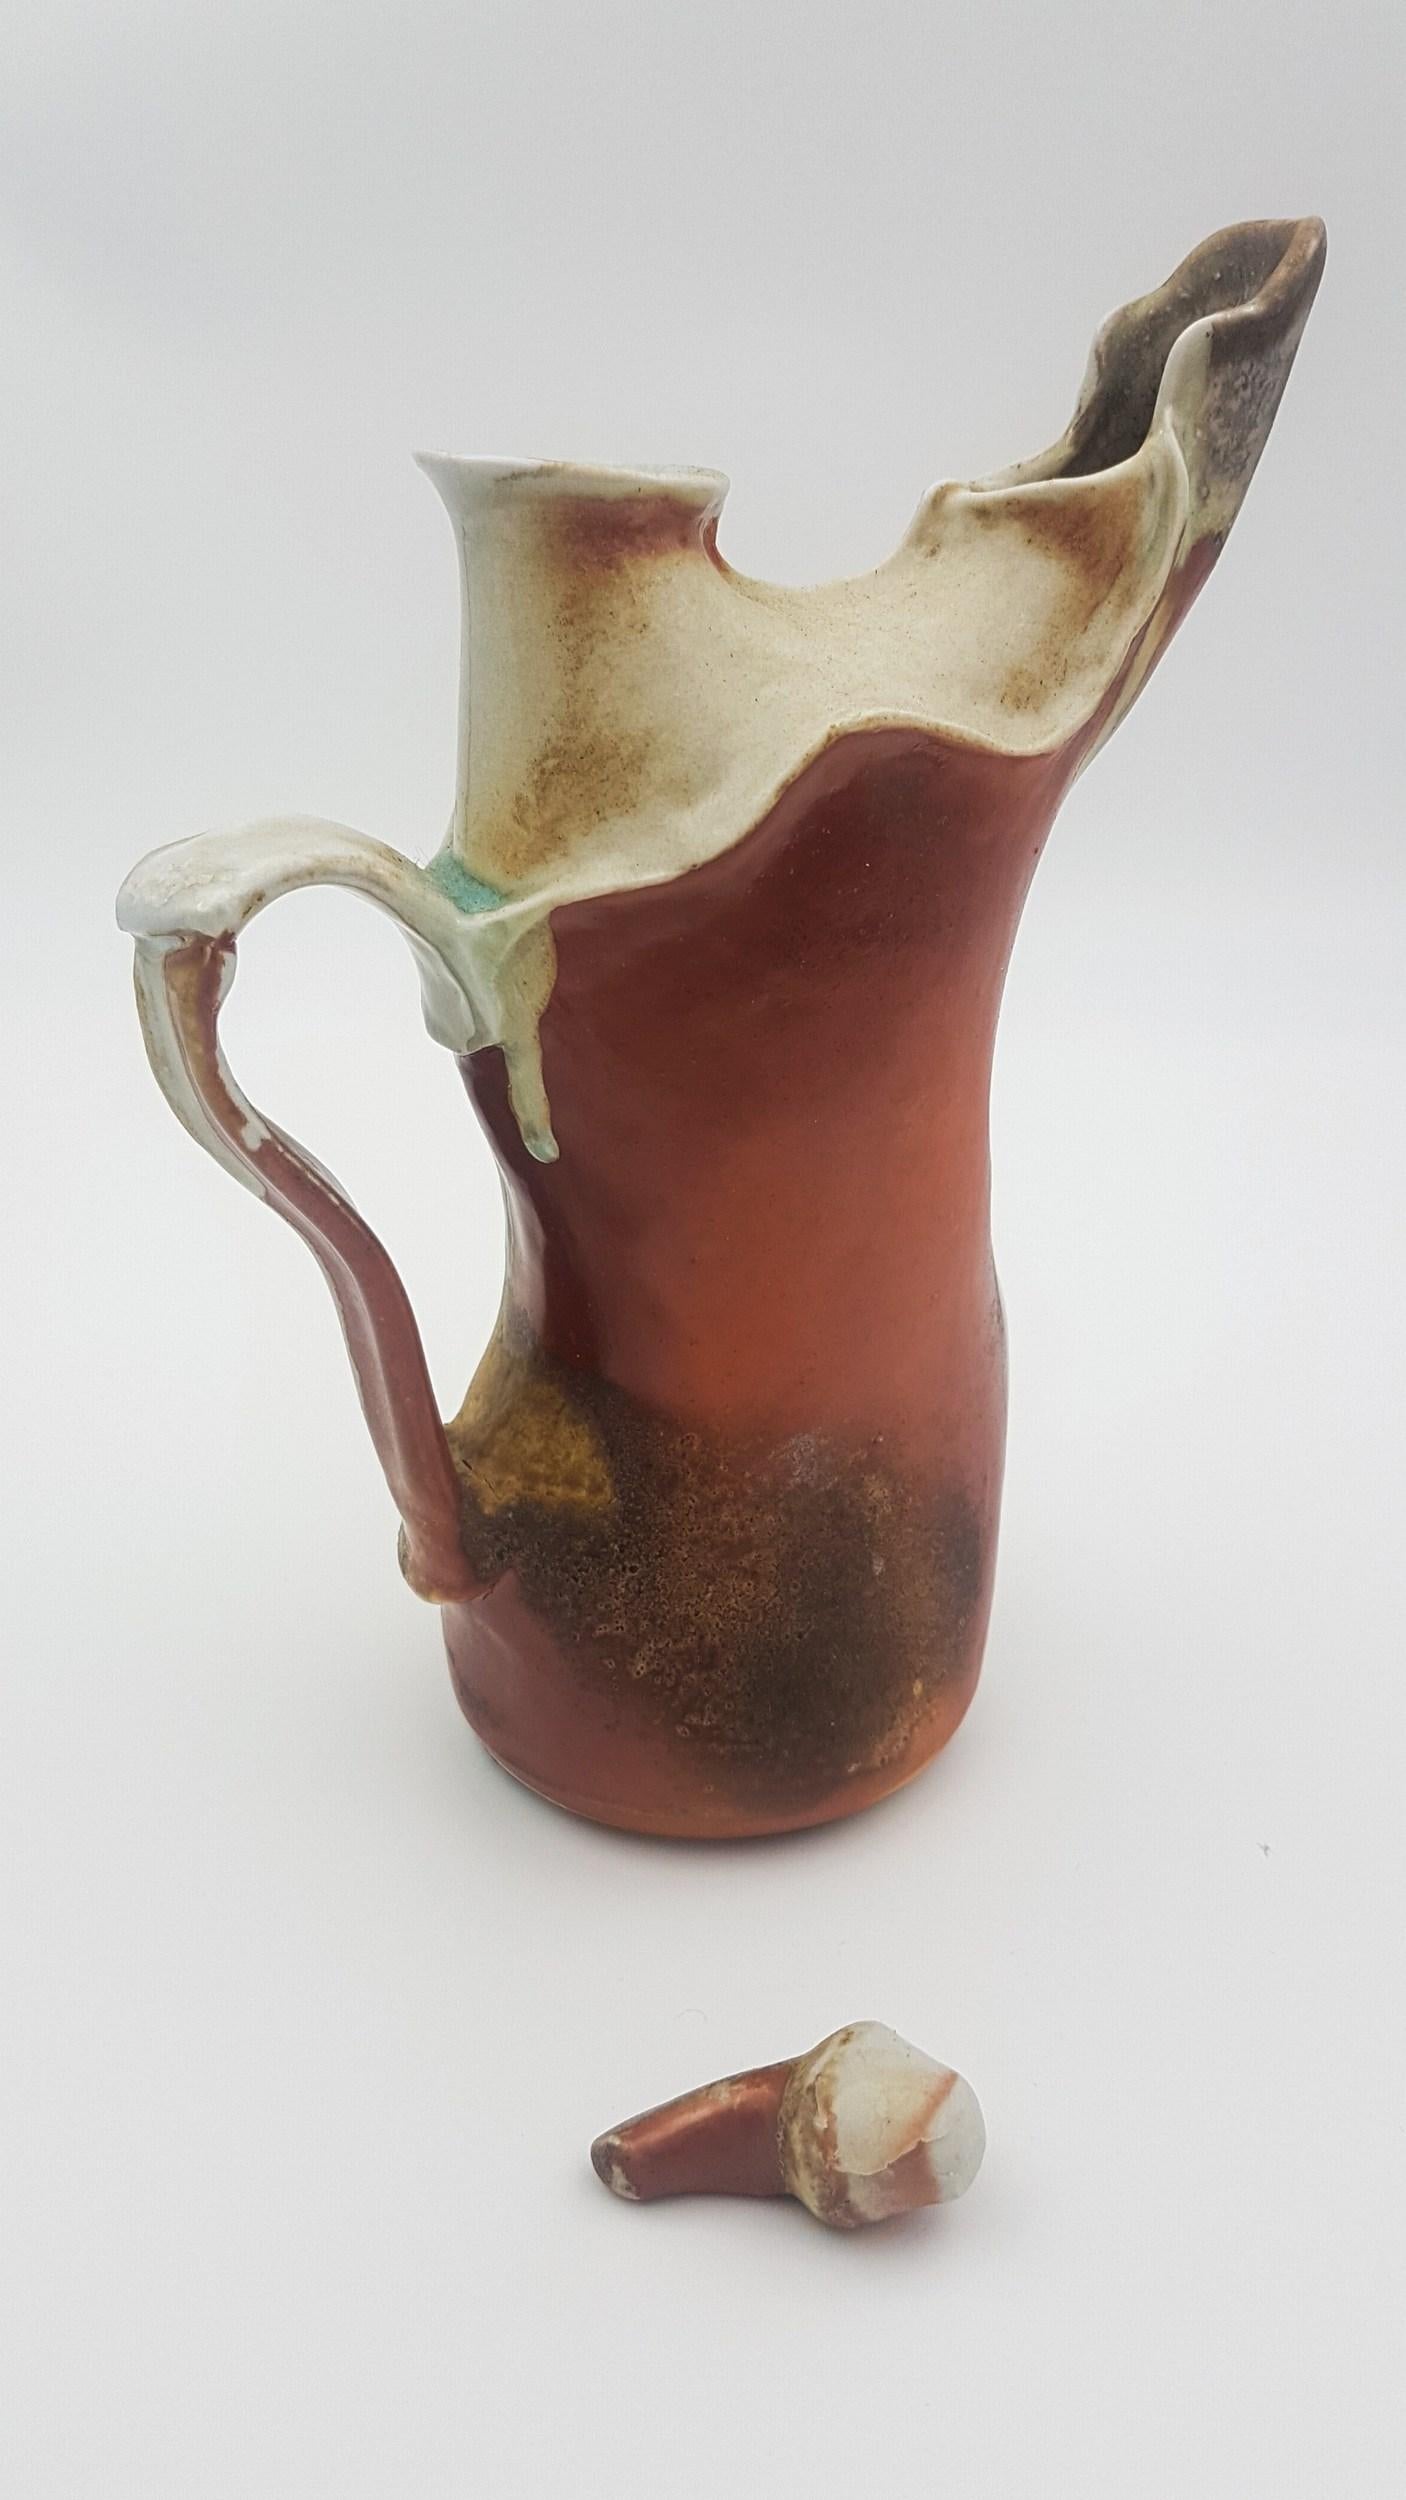 Wood Fired Pitcher (Anagama, Cave, Kiln, Dan Anderson, Rustic) - Sculpture by Melanie Sherman